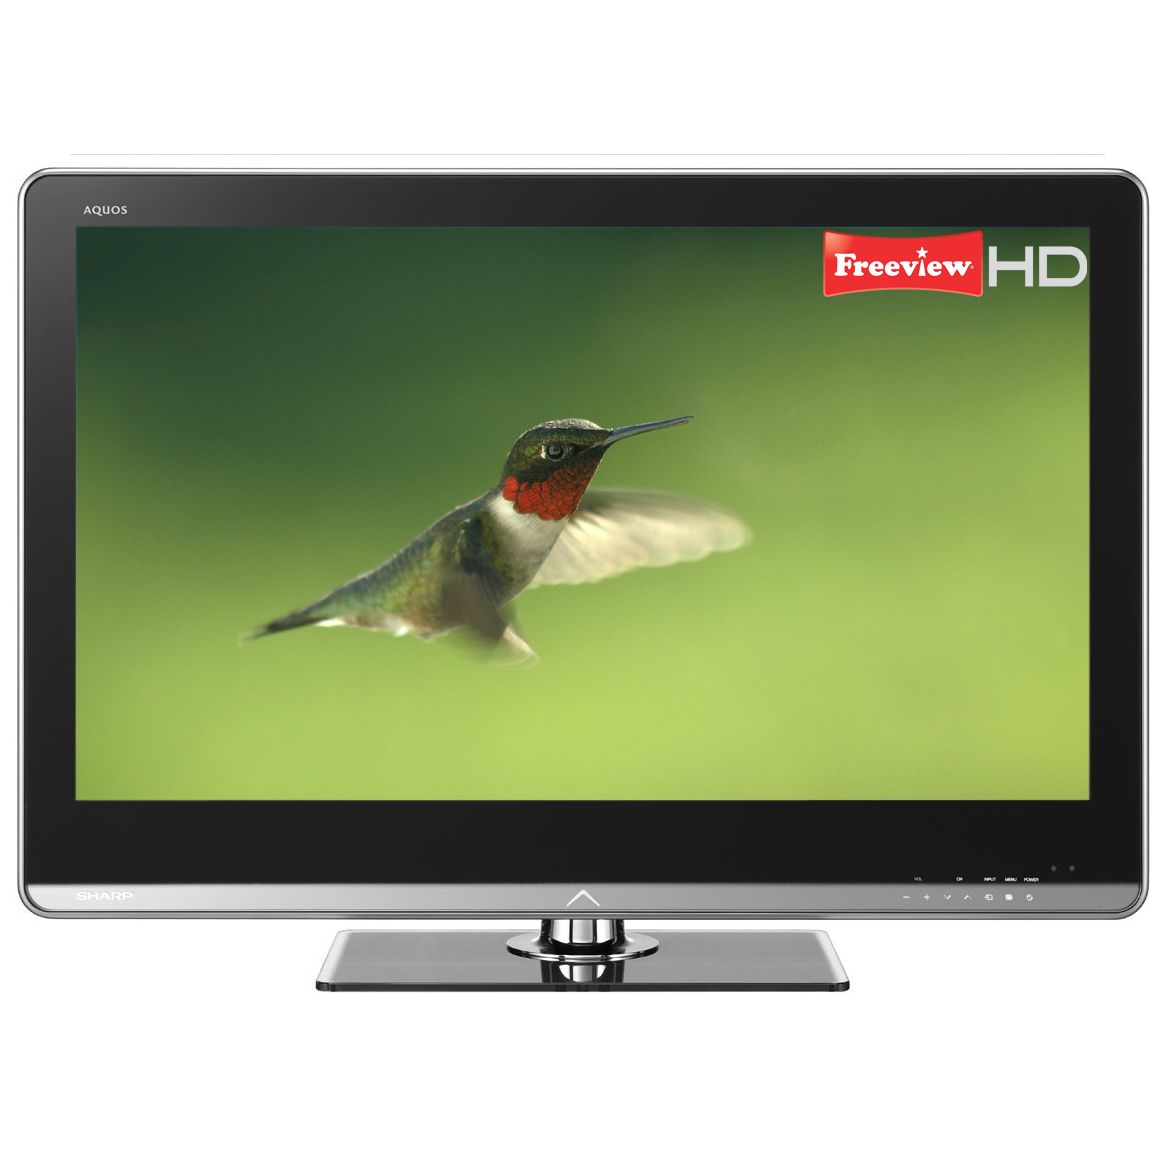 Sharp Quattron LC46LE821E LCD/LED HD 1080p Digital Television, 46 Inch with Built-in Freeview HD at John Lewis